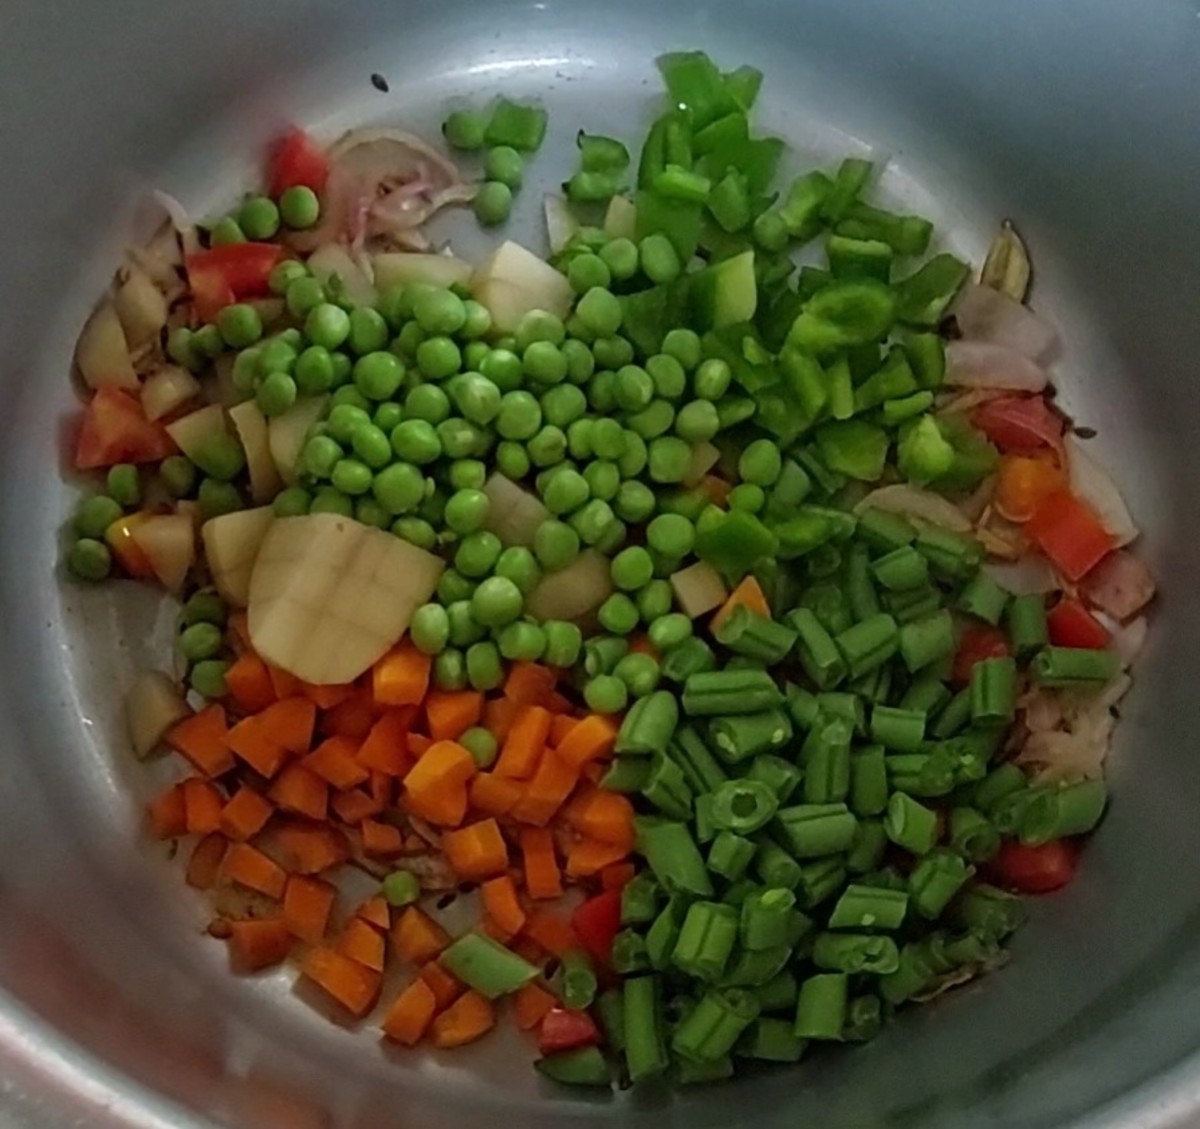 Add 1 cup carrots,1 cup French beans, 1 cup potatoes, 1/2 cup capsicum and 1 cup peas. Saute for a minute.